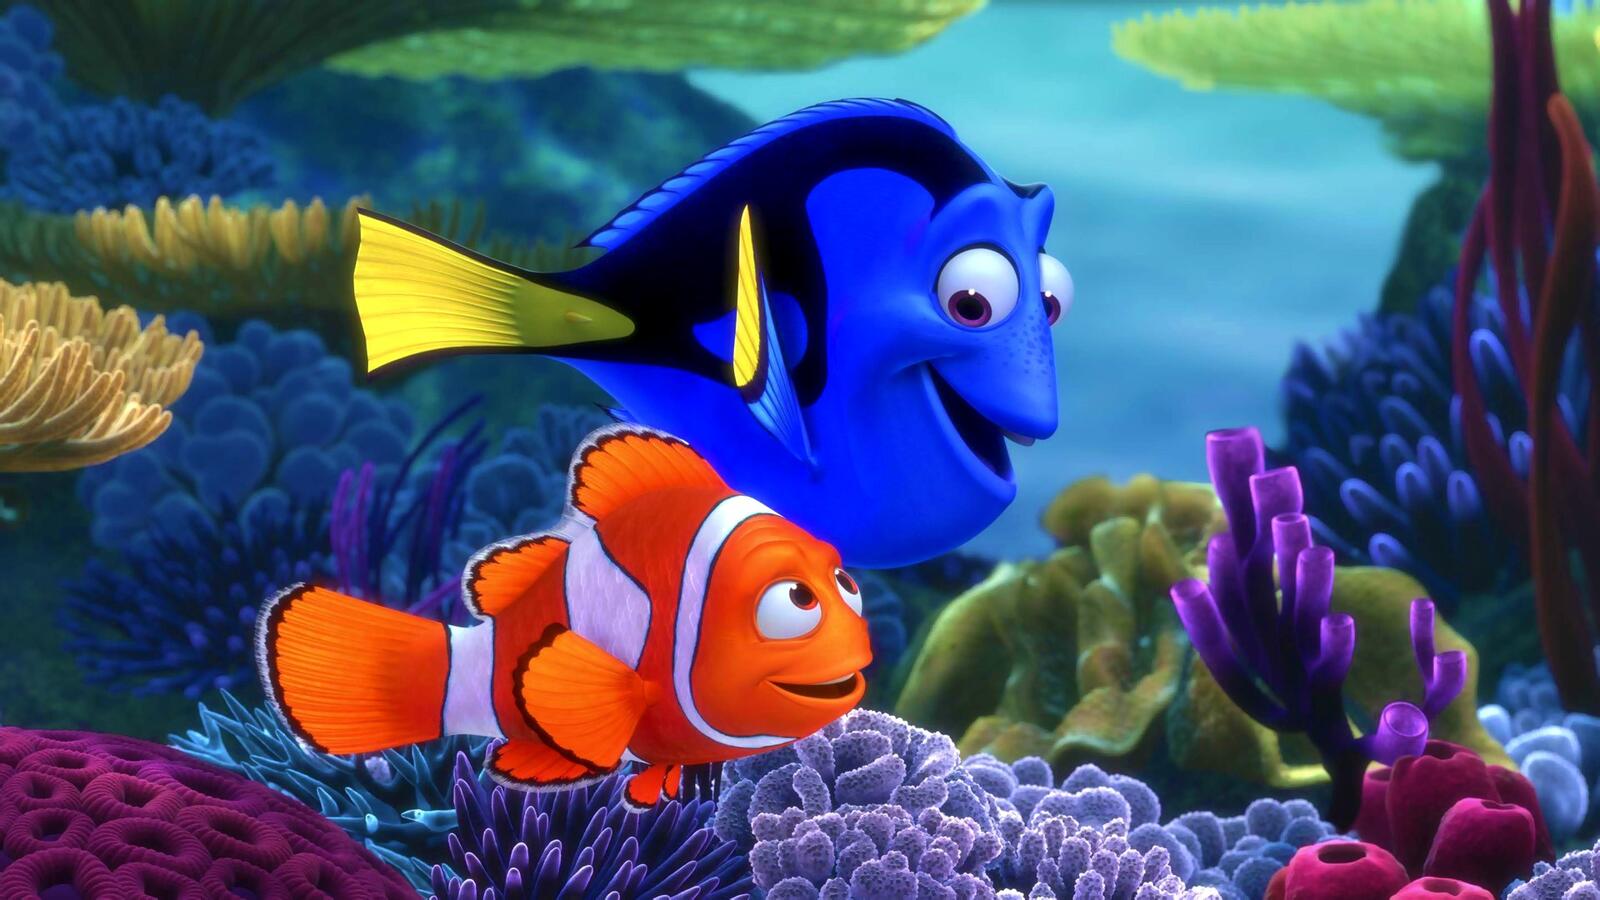 Wallpapers finding Nemo movie animated film on the desktop